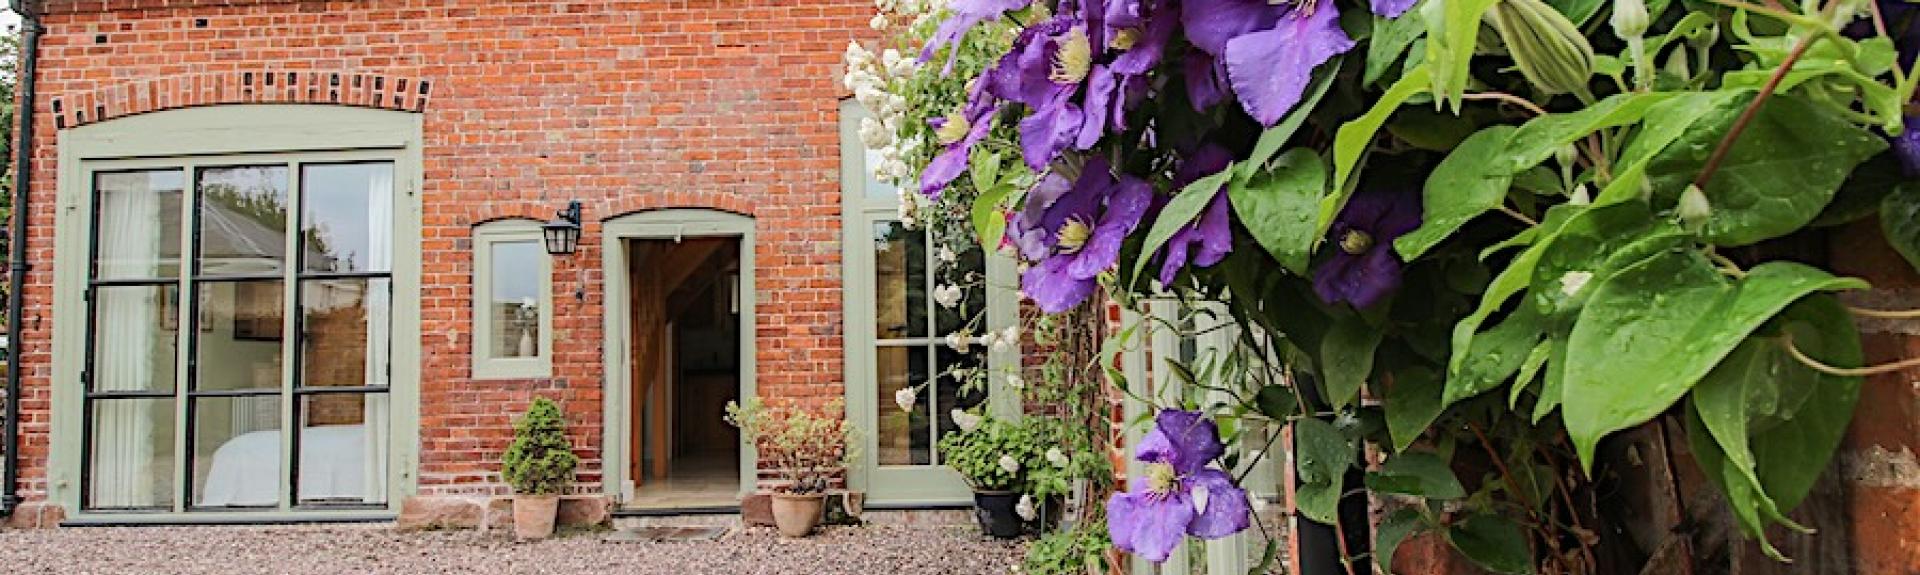 A flowering vine cimbs the walls of aconvrted coach house overlooking a courtyard in Shropshire